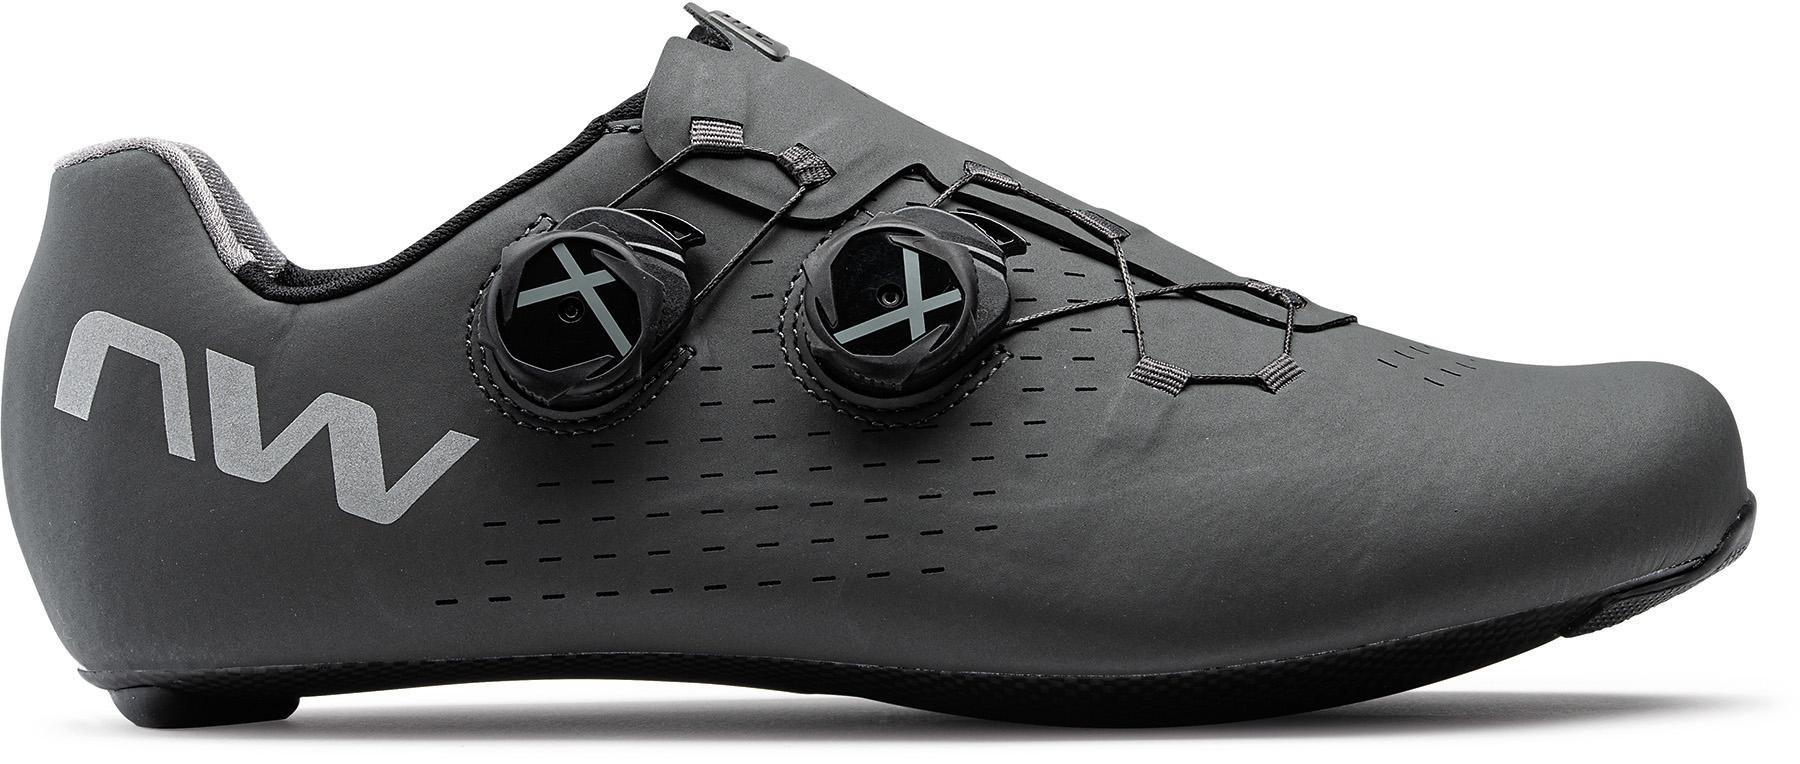 Northwave Extreme Pro 2 Road Shoes  Anthracite